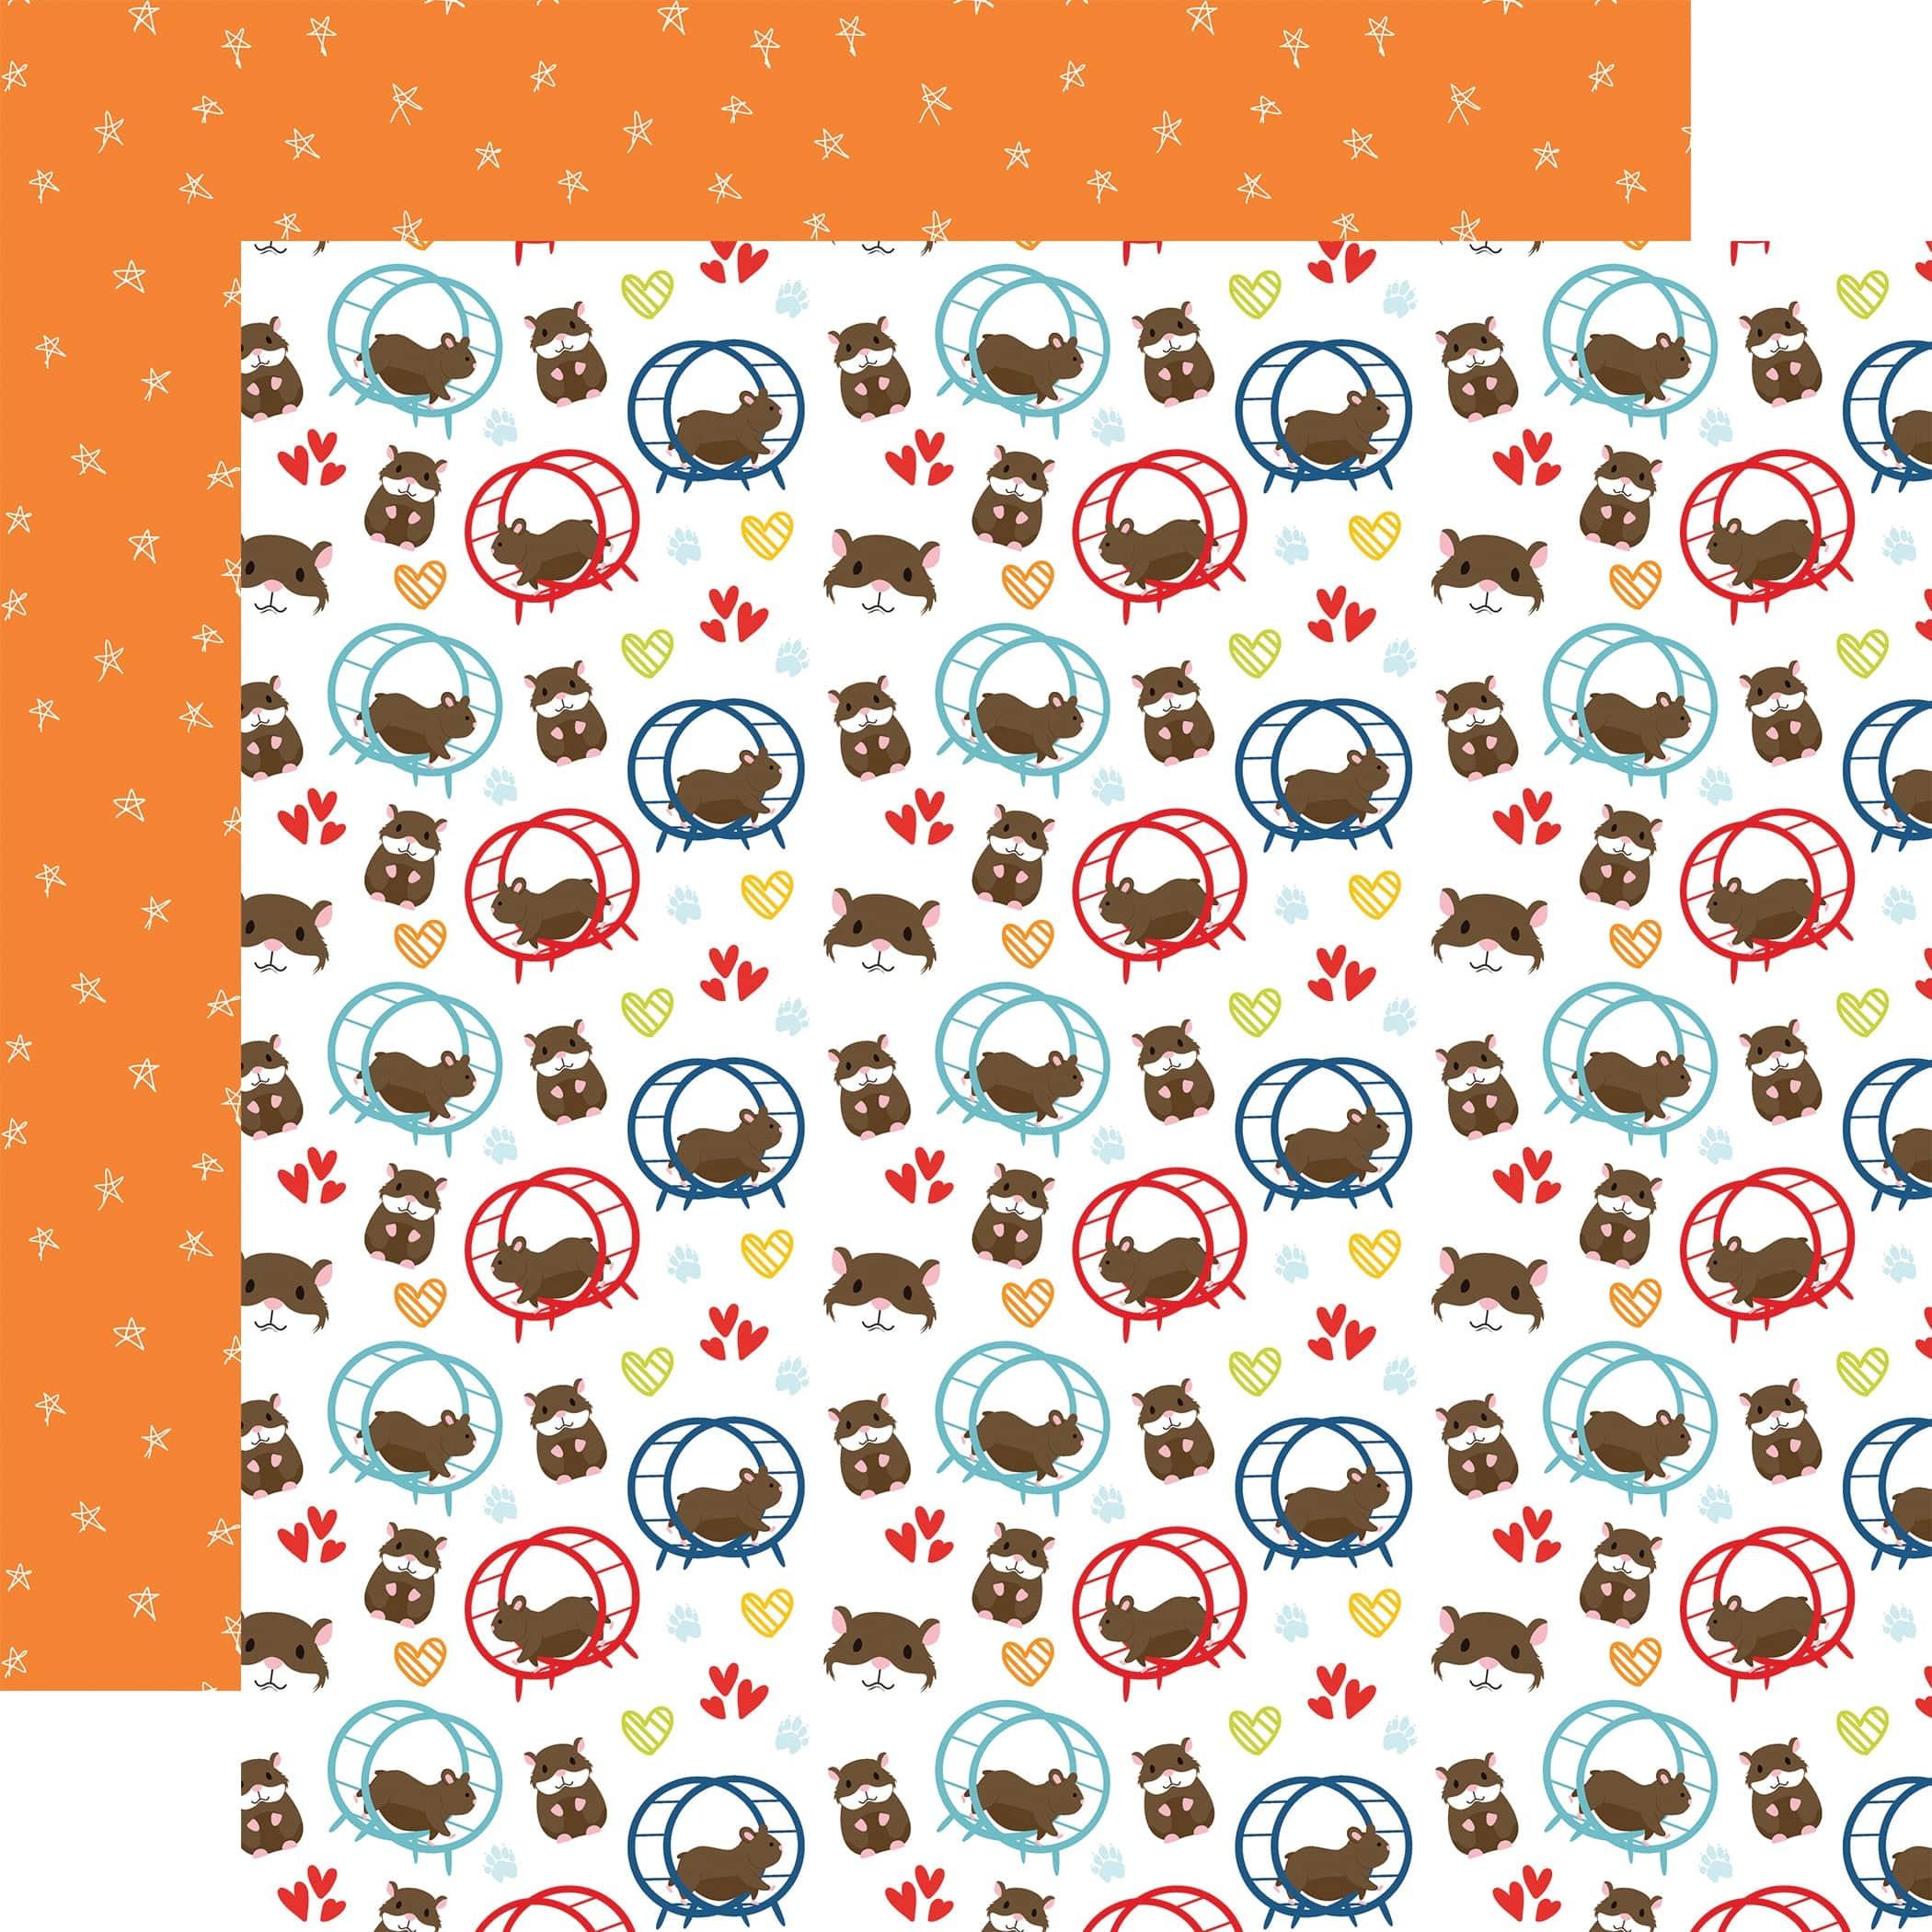 Pets Collection On A Roll 12 x 12 Double-Sided Scrapbook Paper by Echo Park Paper